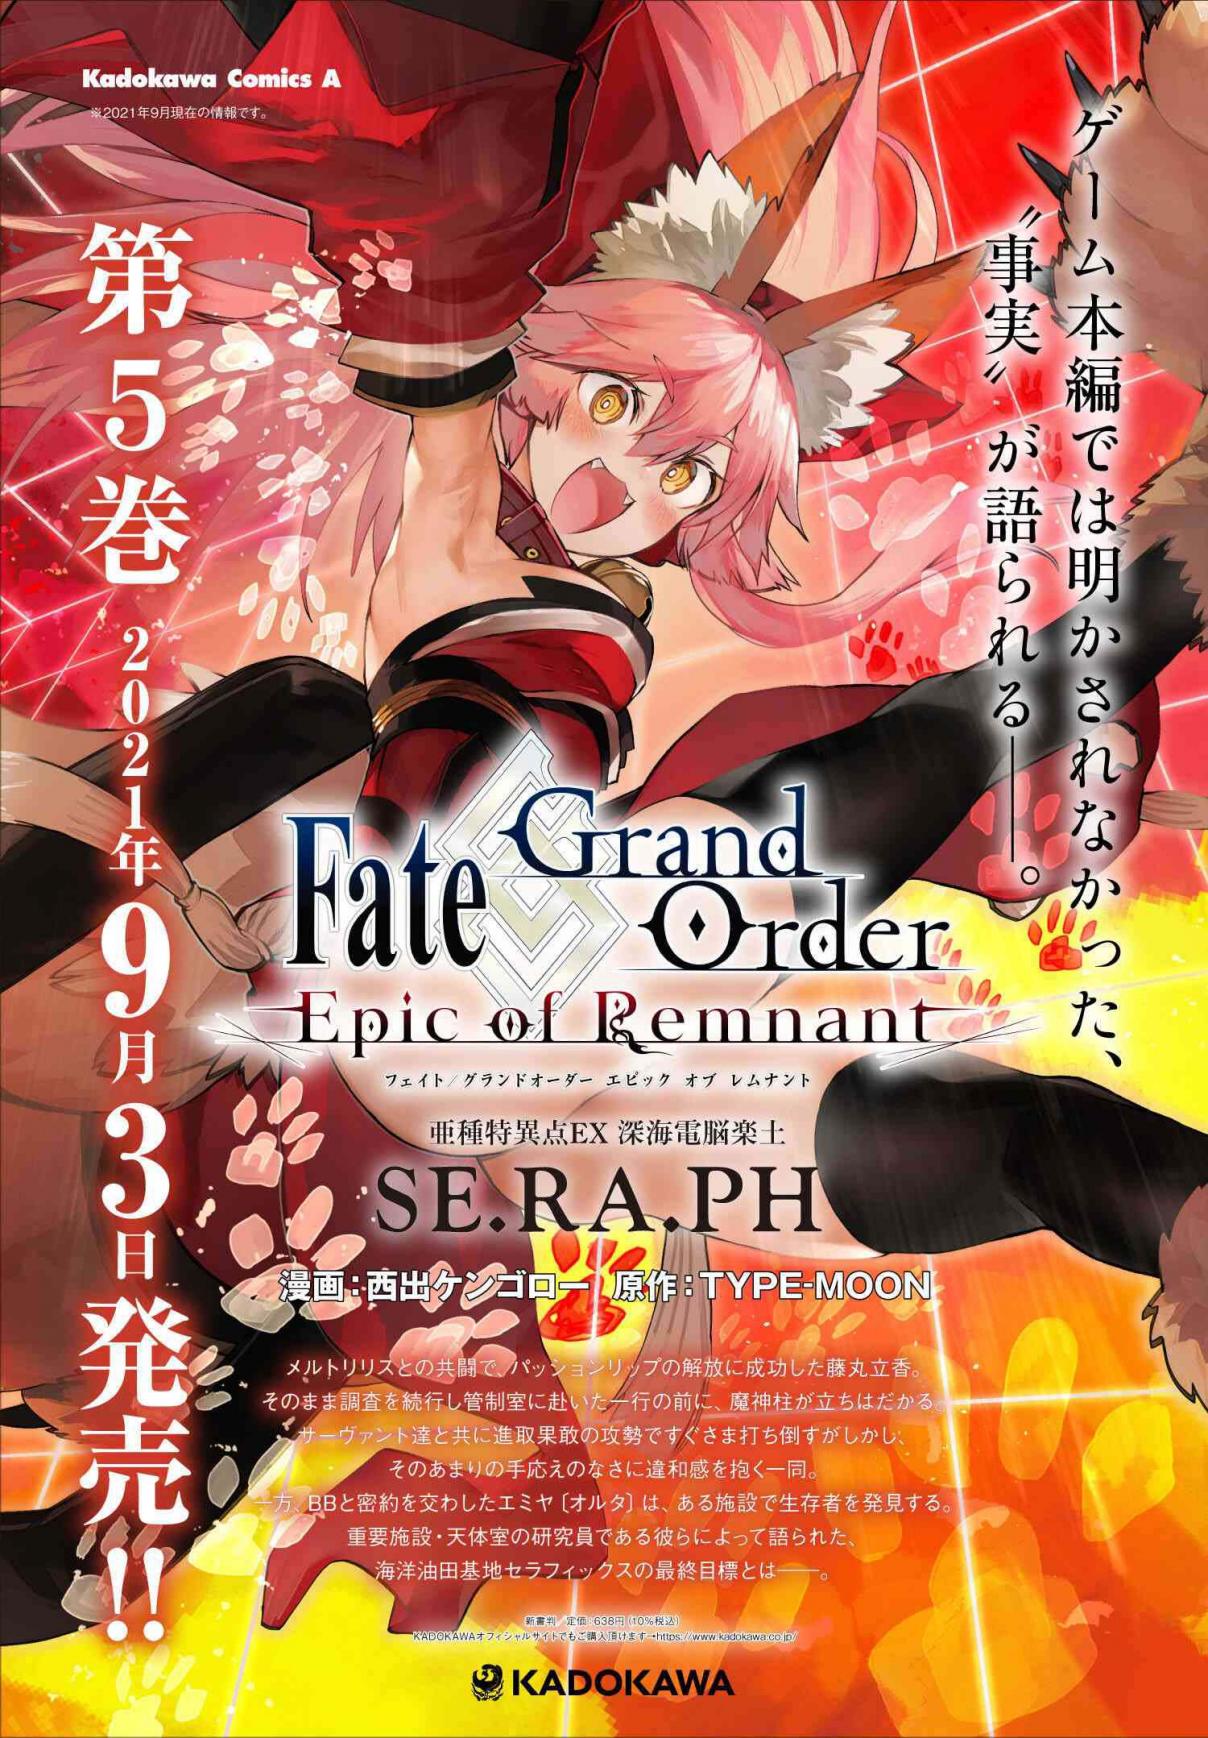 Fate/Grand Order -Epic of Remnant- Deep Sea Cyber-Paradise, SE.RA.PH 27.3